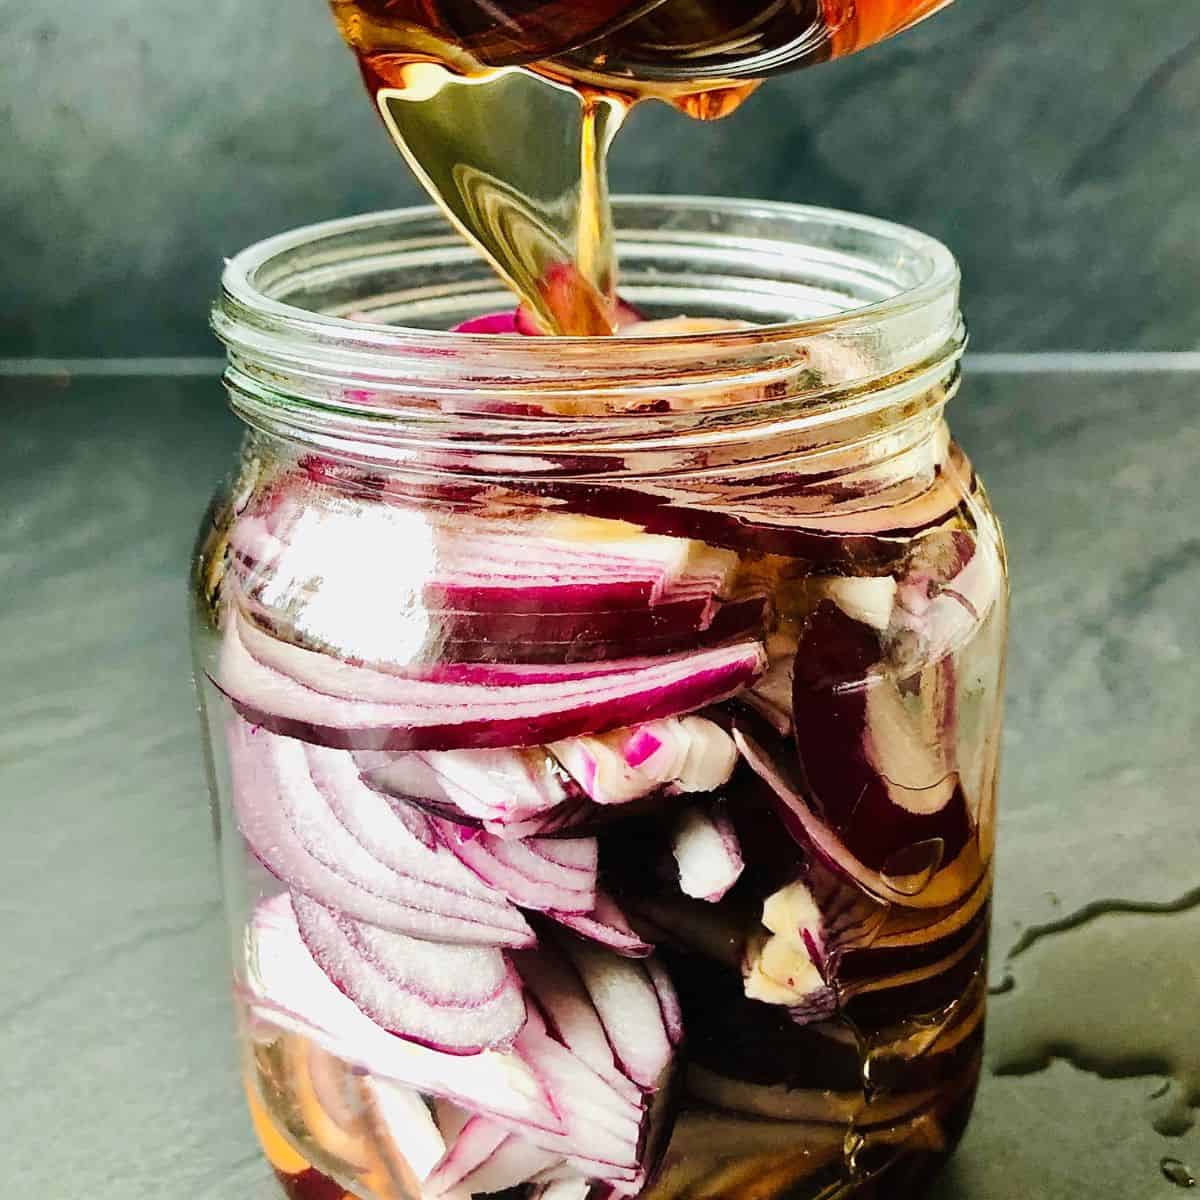 Pouring malt vinegar into a jar containing thinly sliced red onion